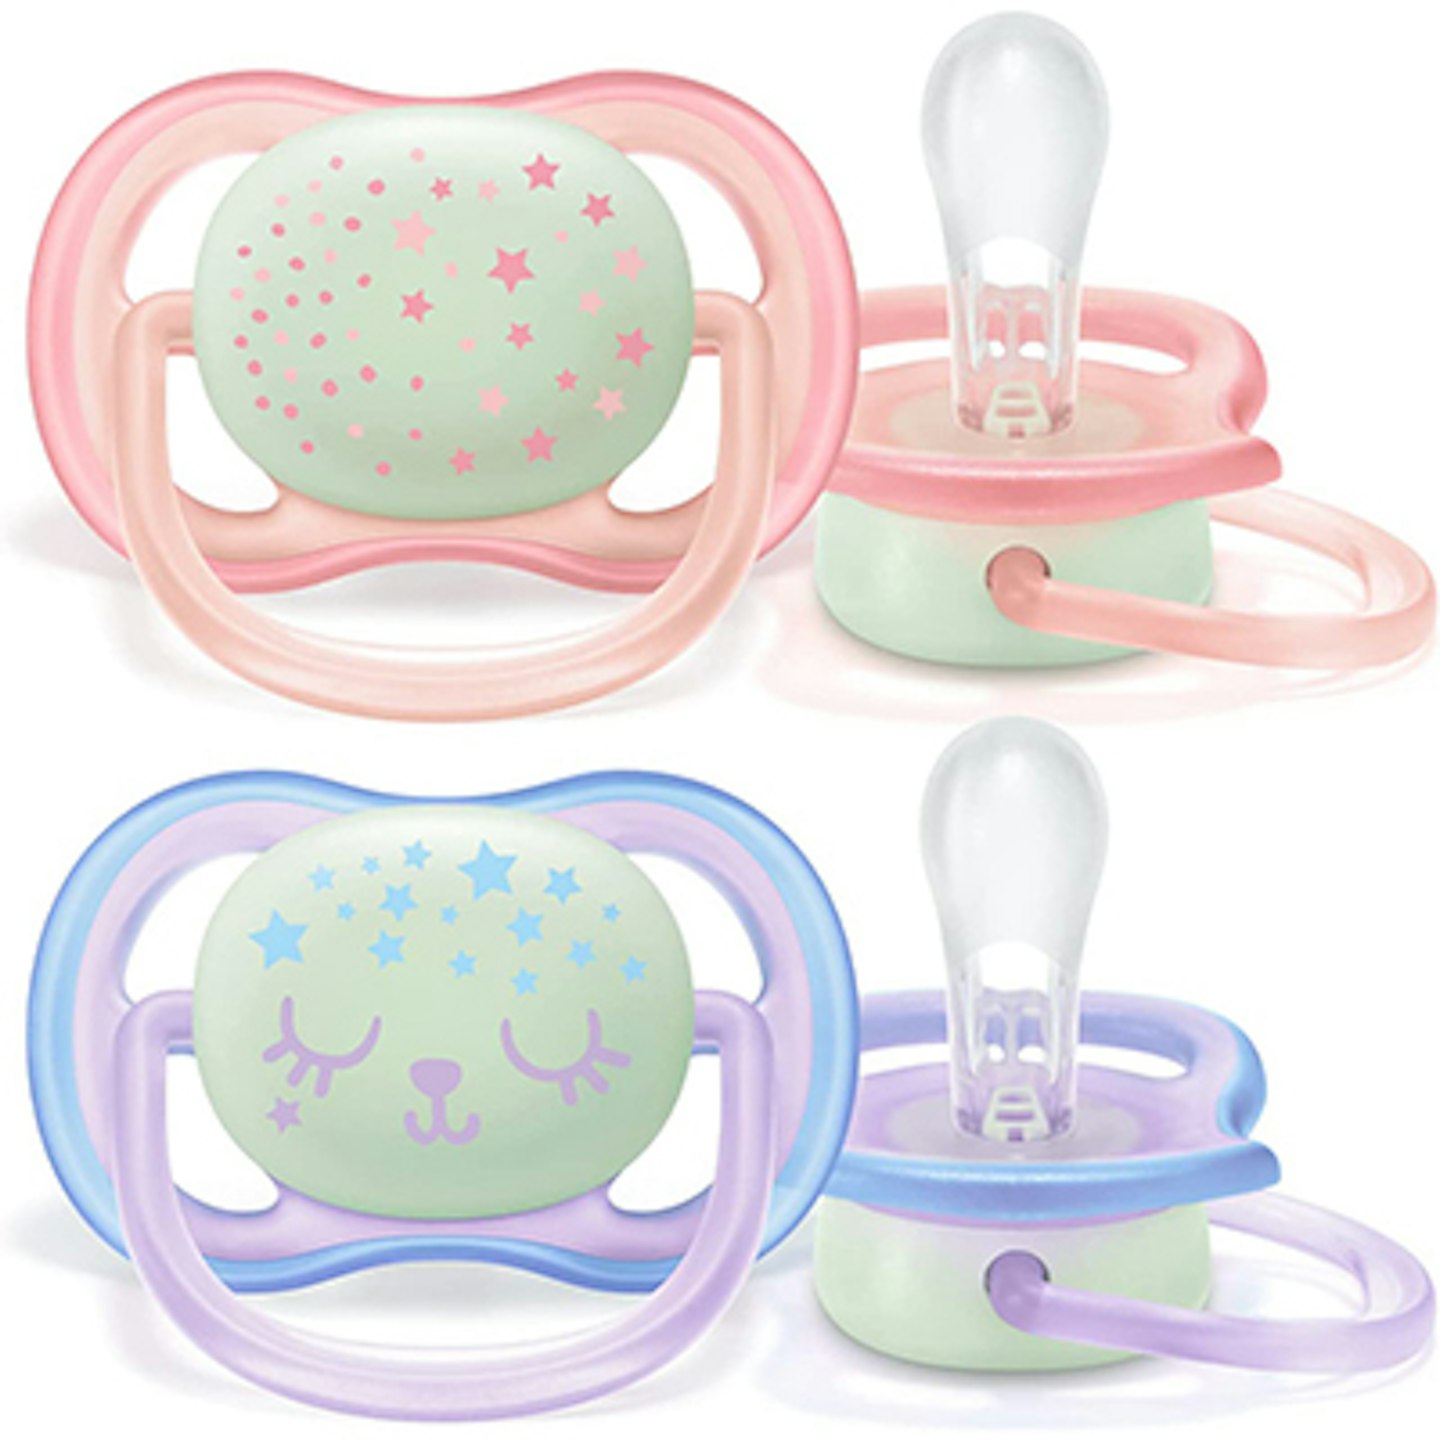 Philips Avent Soothers